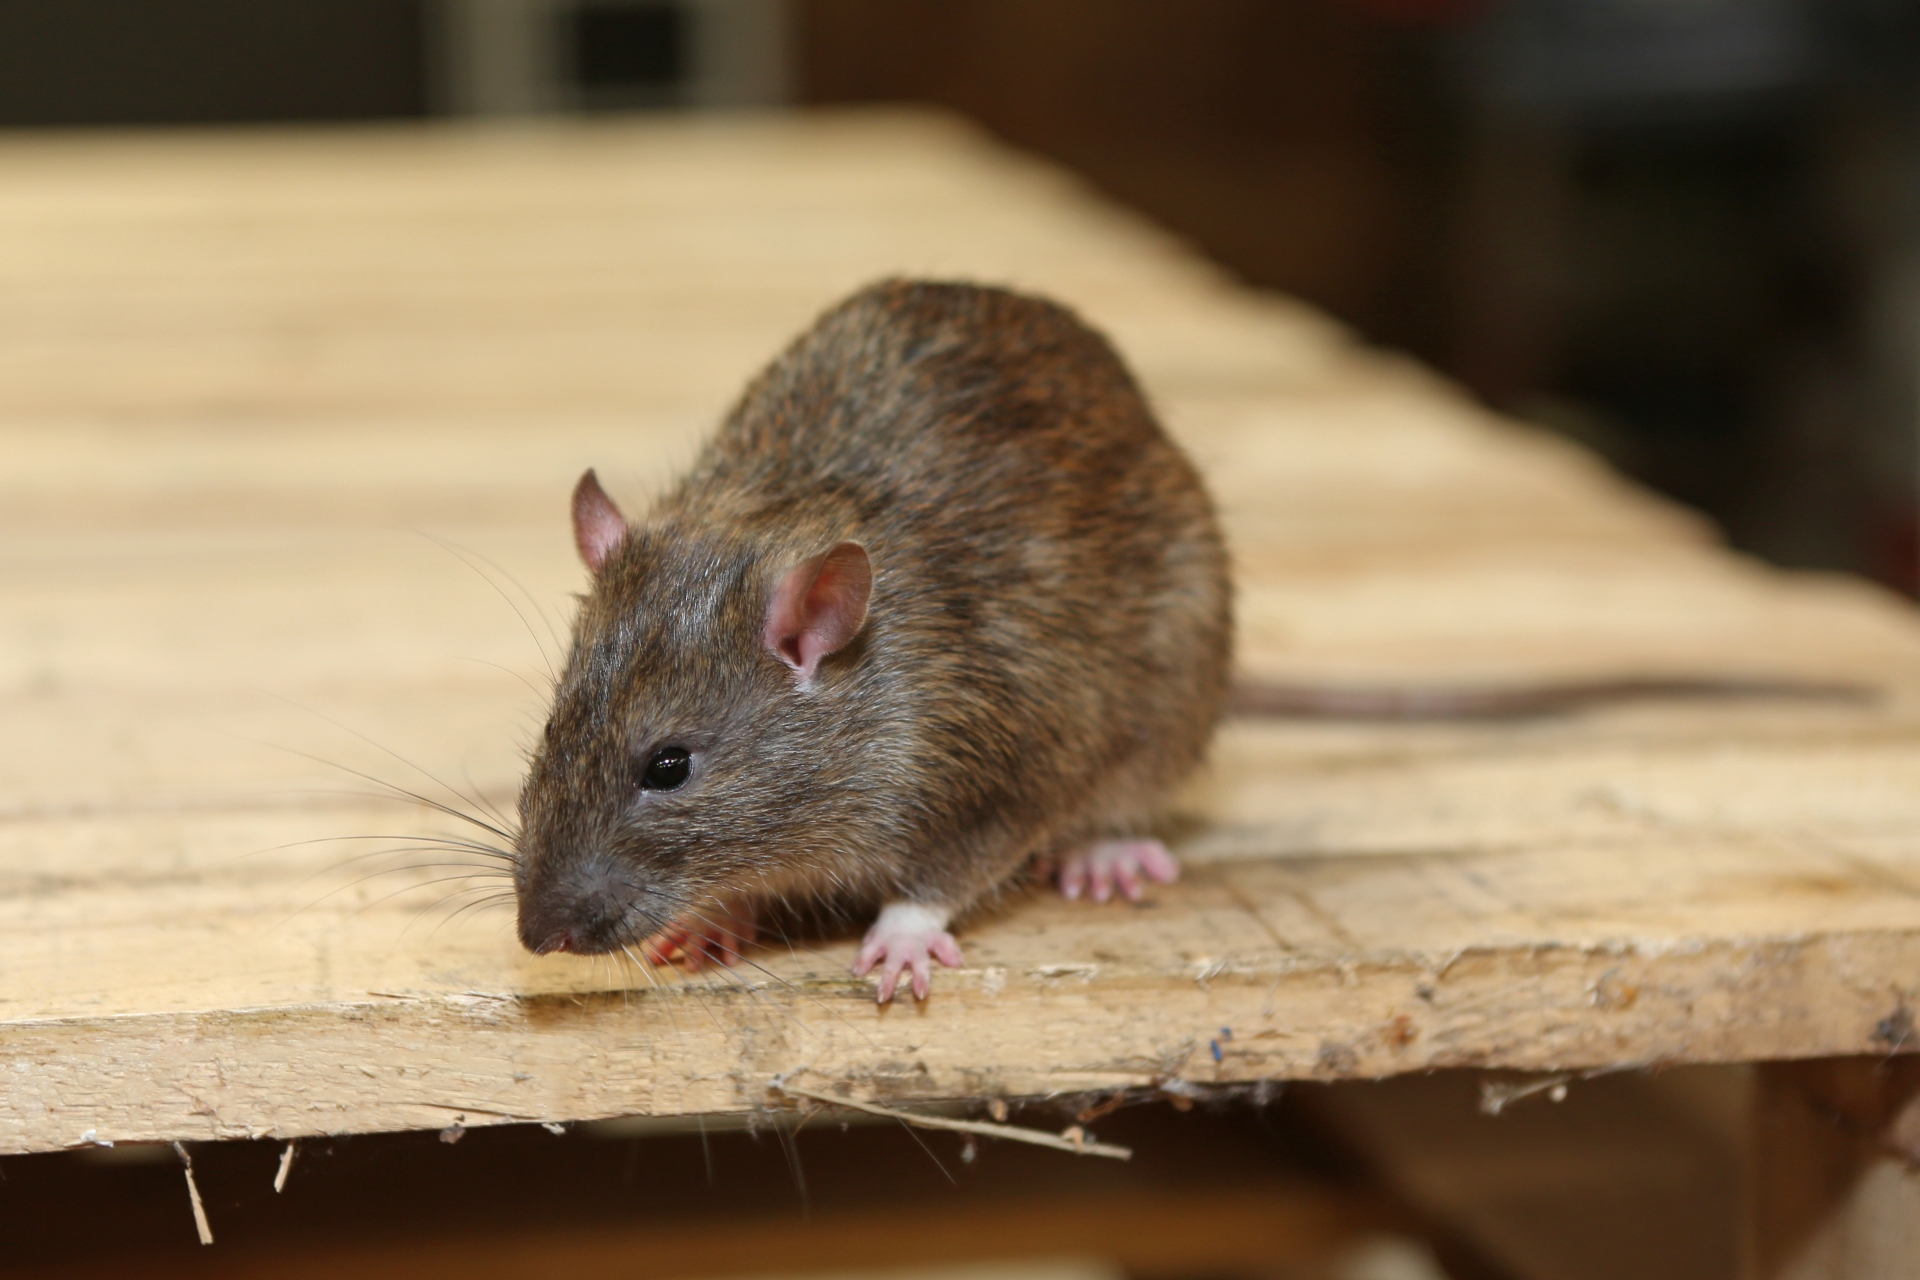 Rat Infestation, Pest Control in Mile End, Stepney, E1. Call Now 020 8166 9746